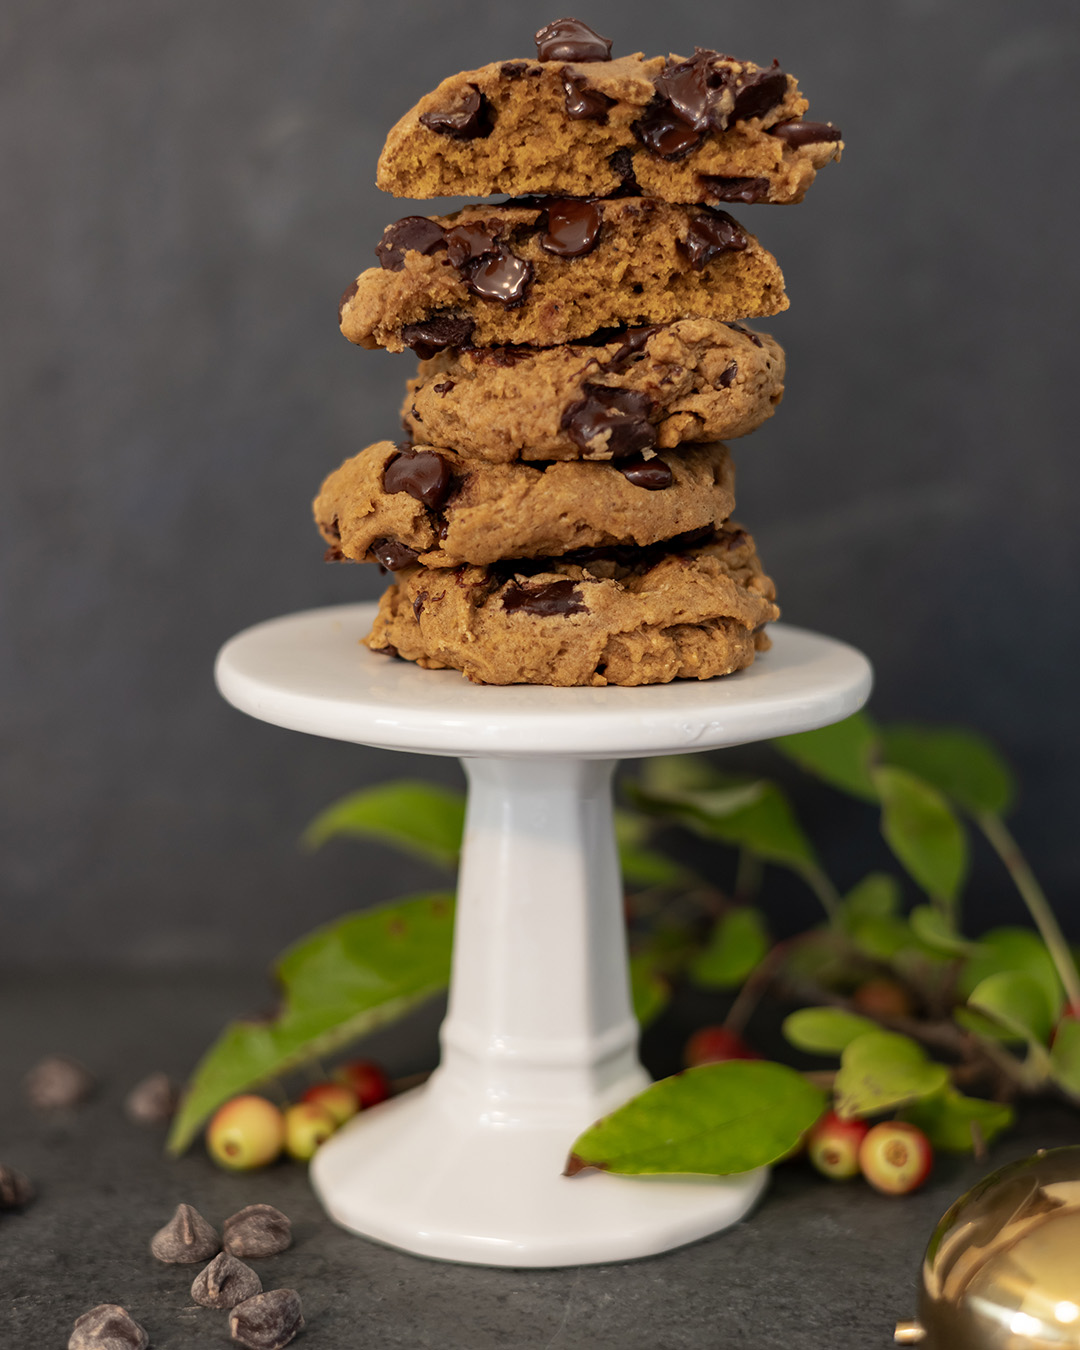 A stack of cookies with one split in half to show texture and melted chocolate chips.